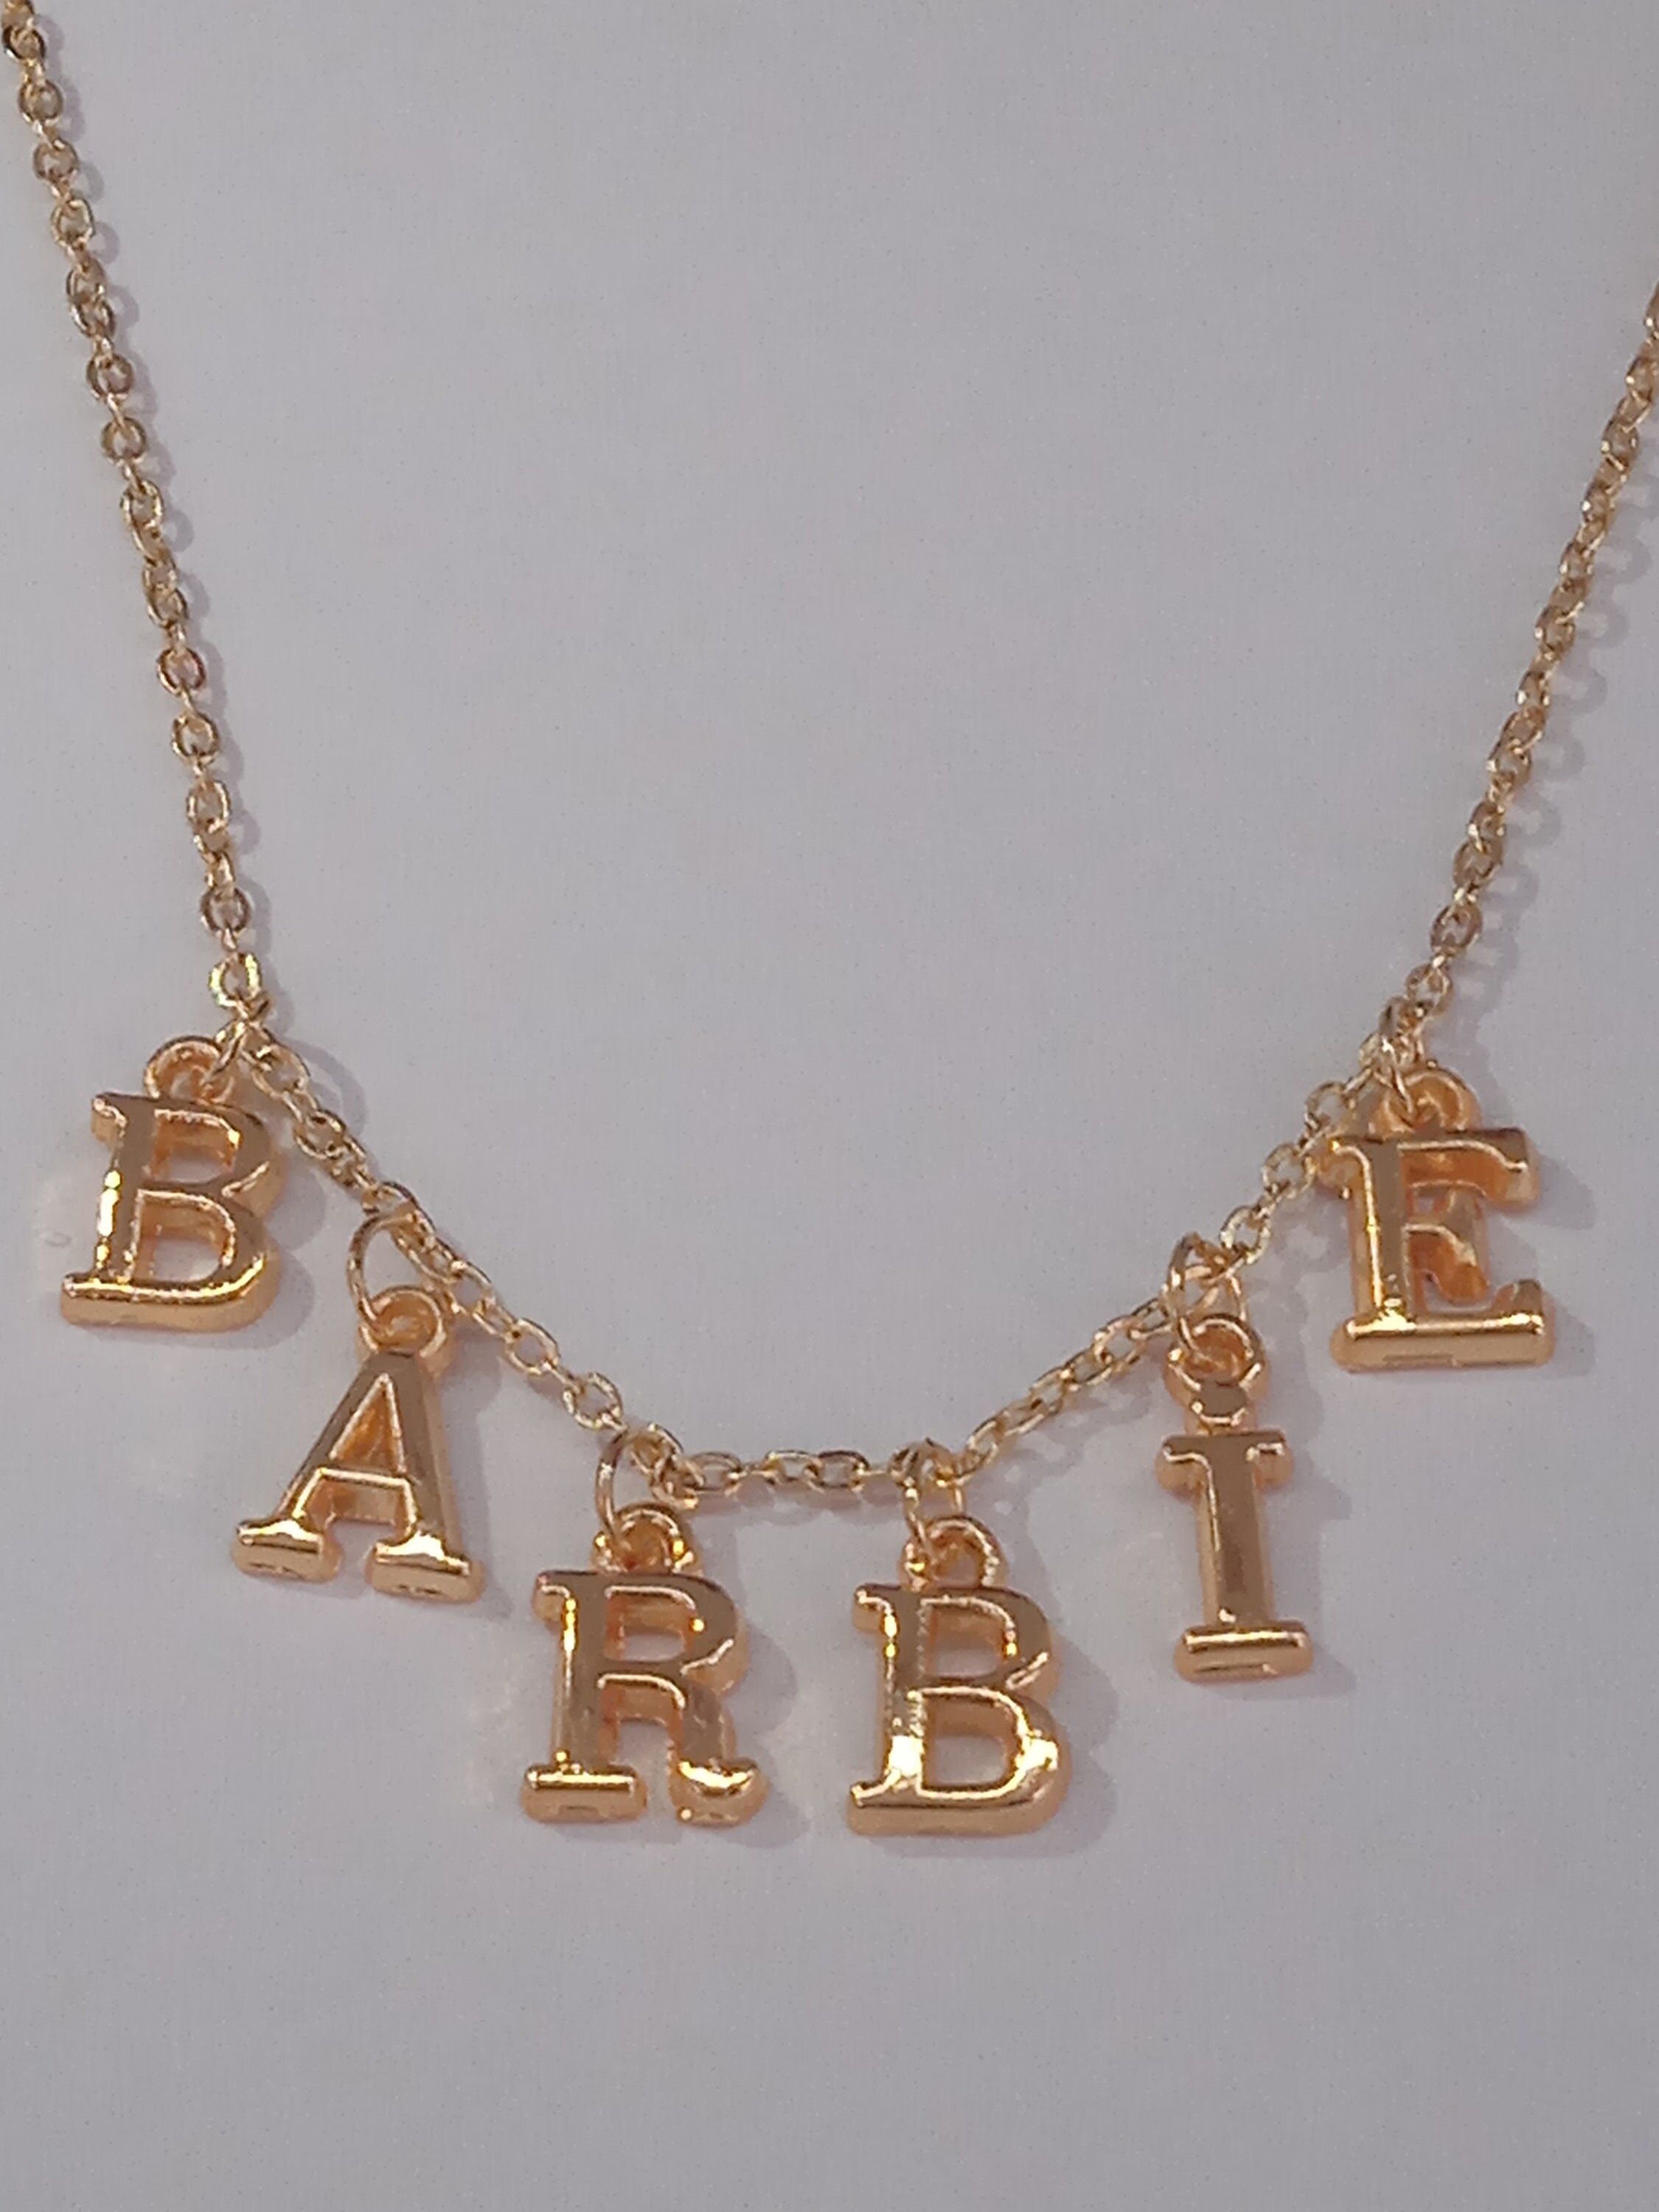 Hollywood Motel Keys 24K Gold Necklace w/ 18K Gold Charms Clip Chain